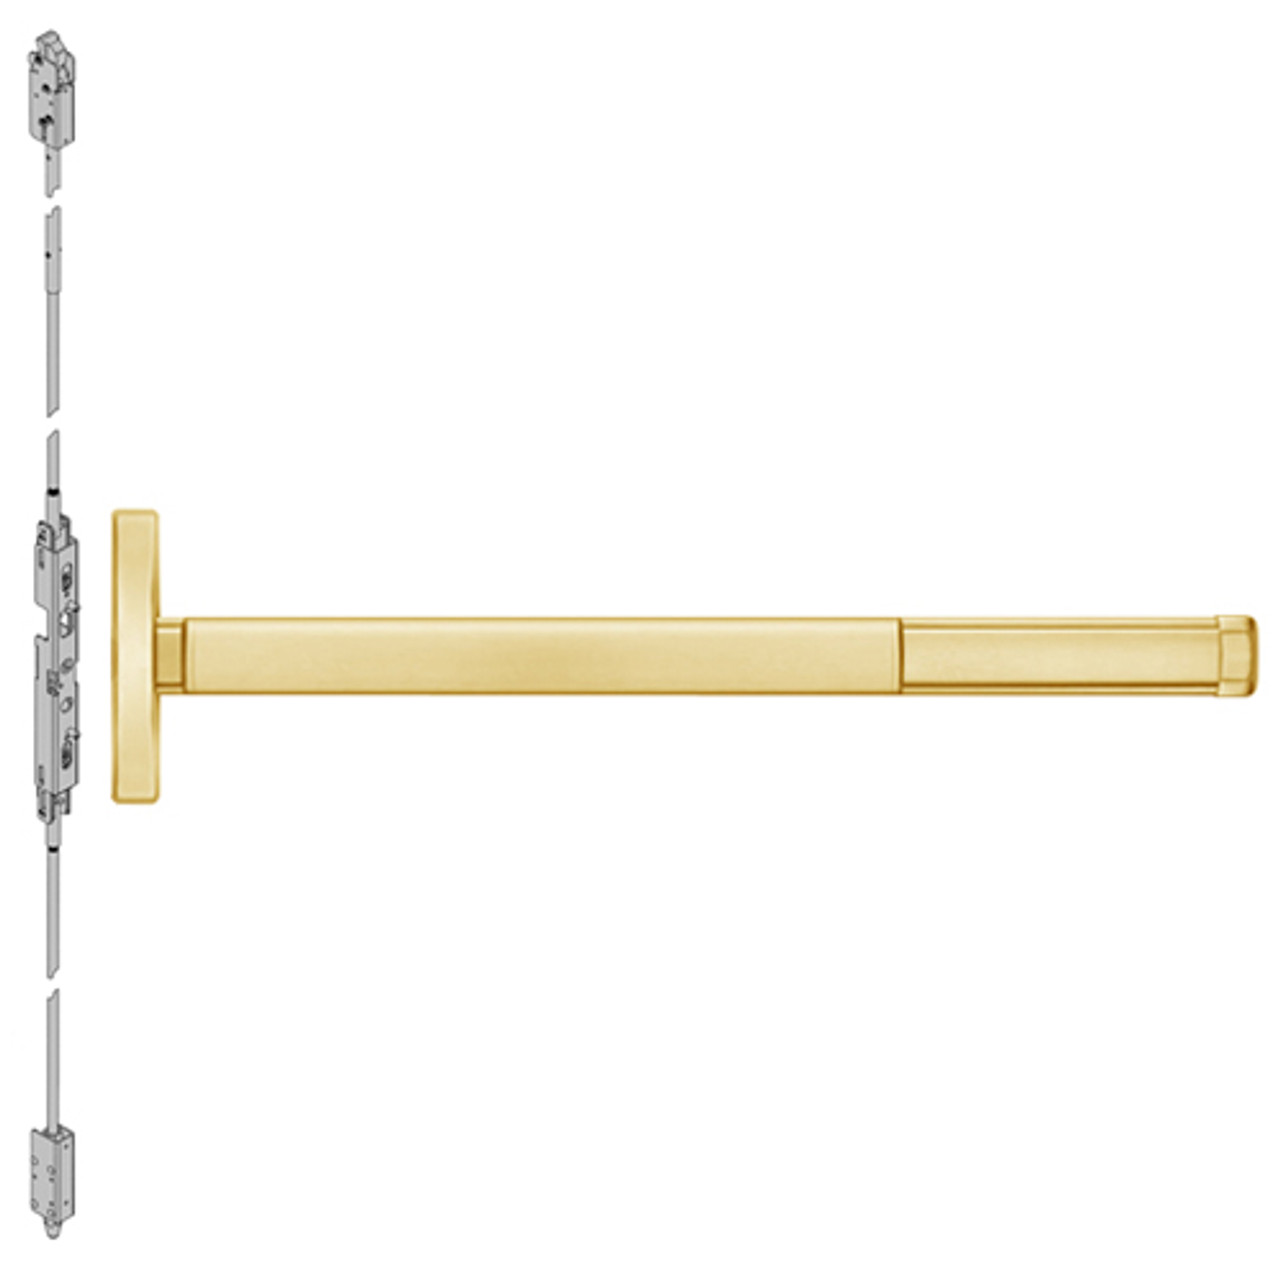 2601-605-48 PHI 2600 Series Non Fire Rated Concealed Vertical Rod Exit Device Prepped for Cover Plate in Bright Brass Finish